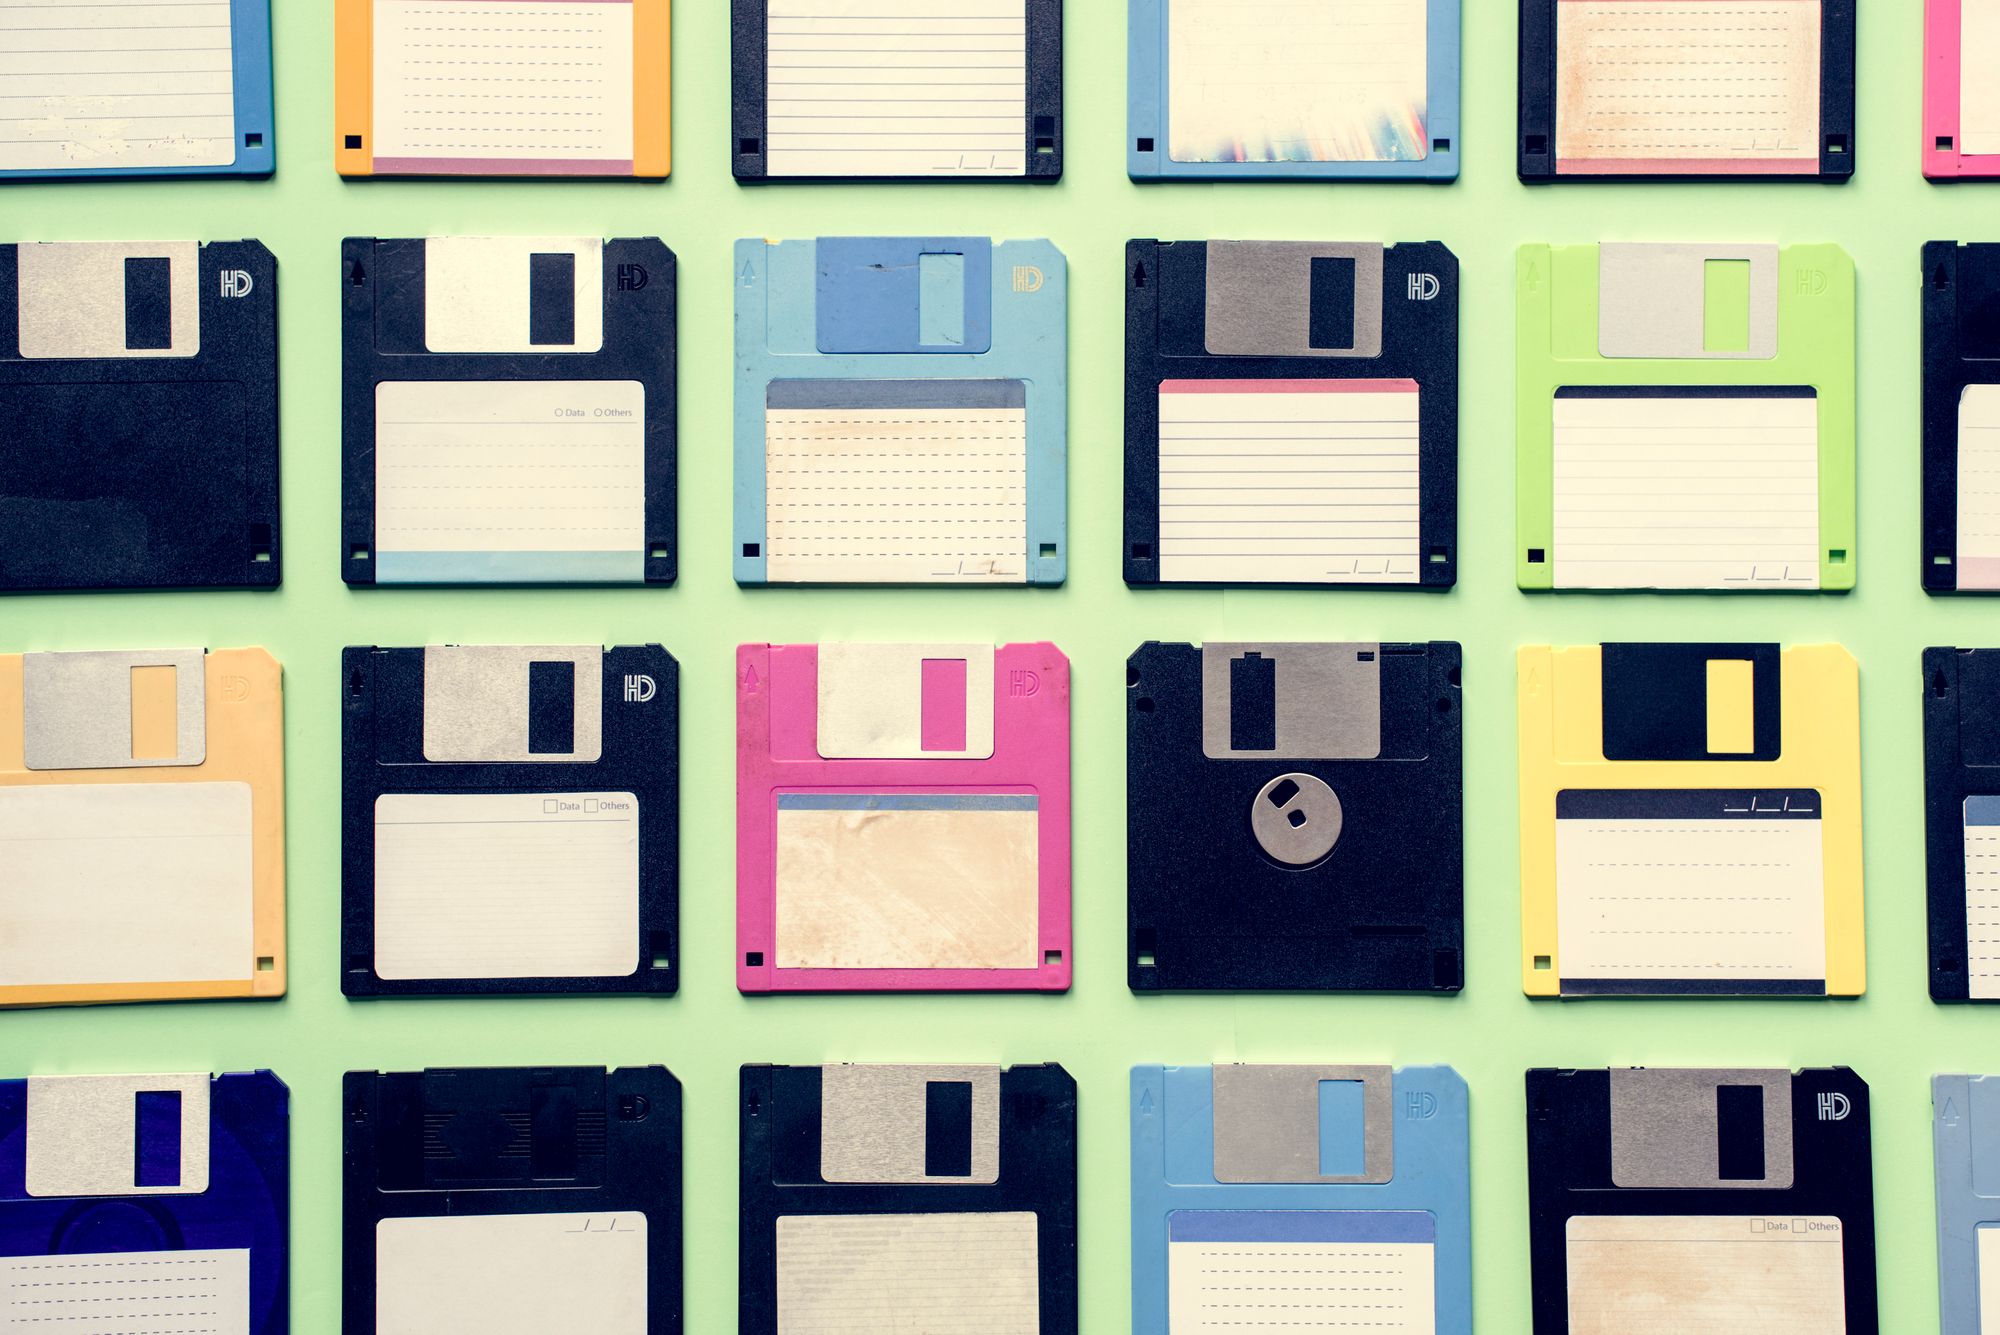 Old school floppy disks laid out on a pale green background. 